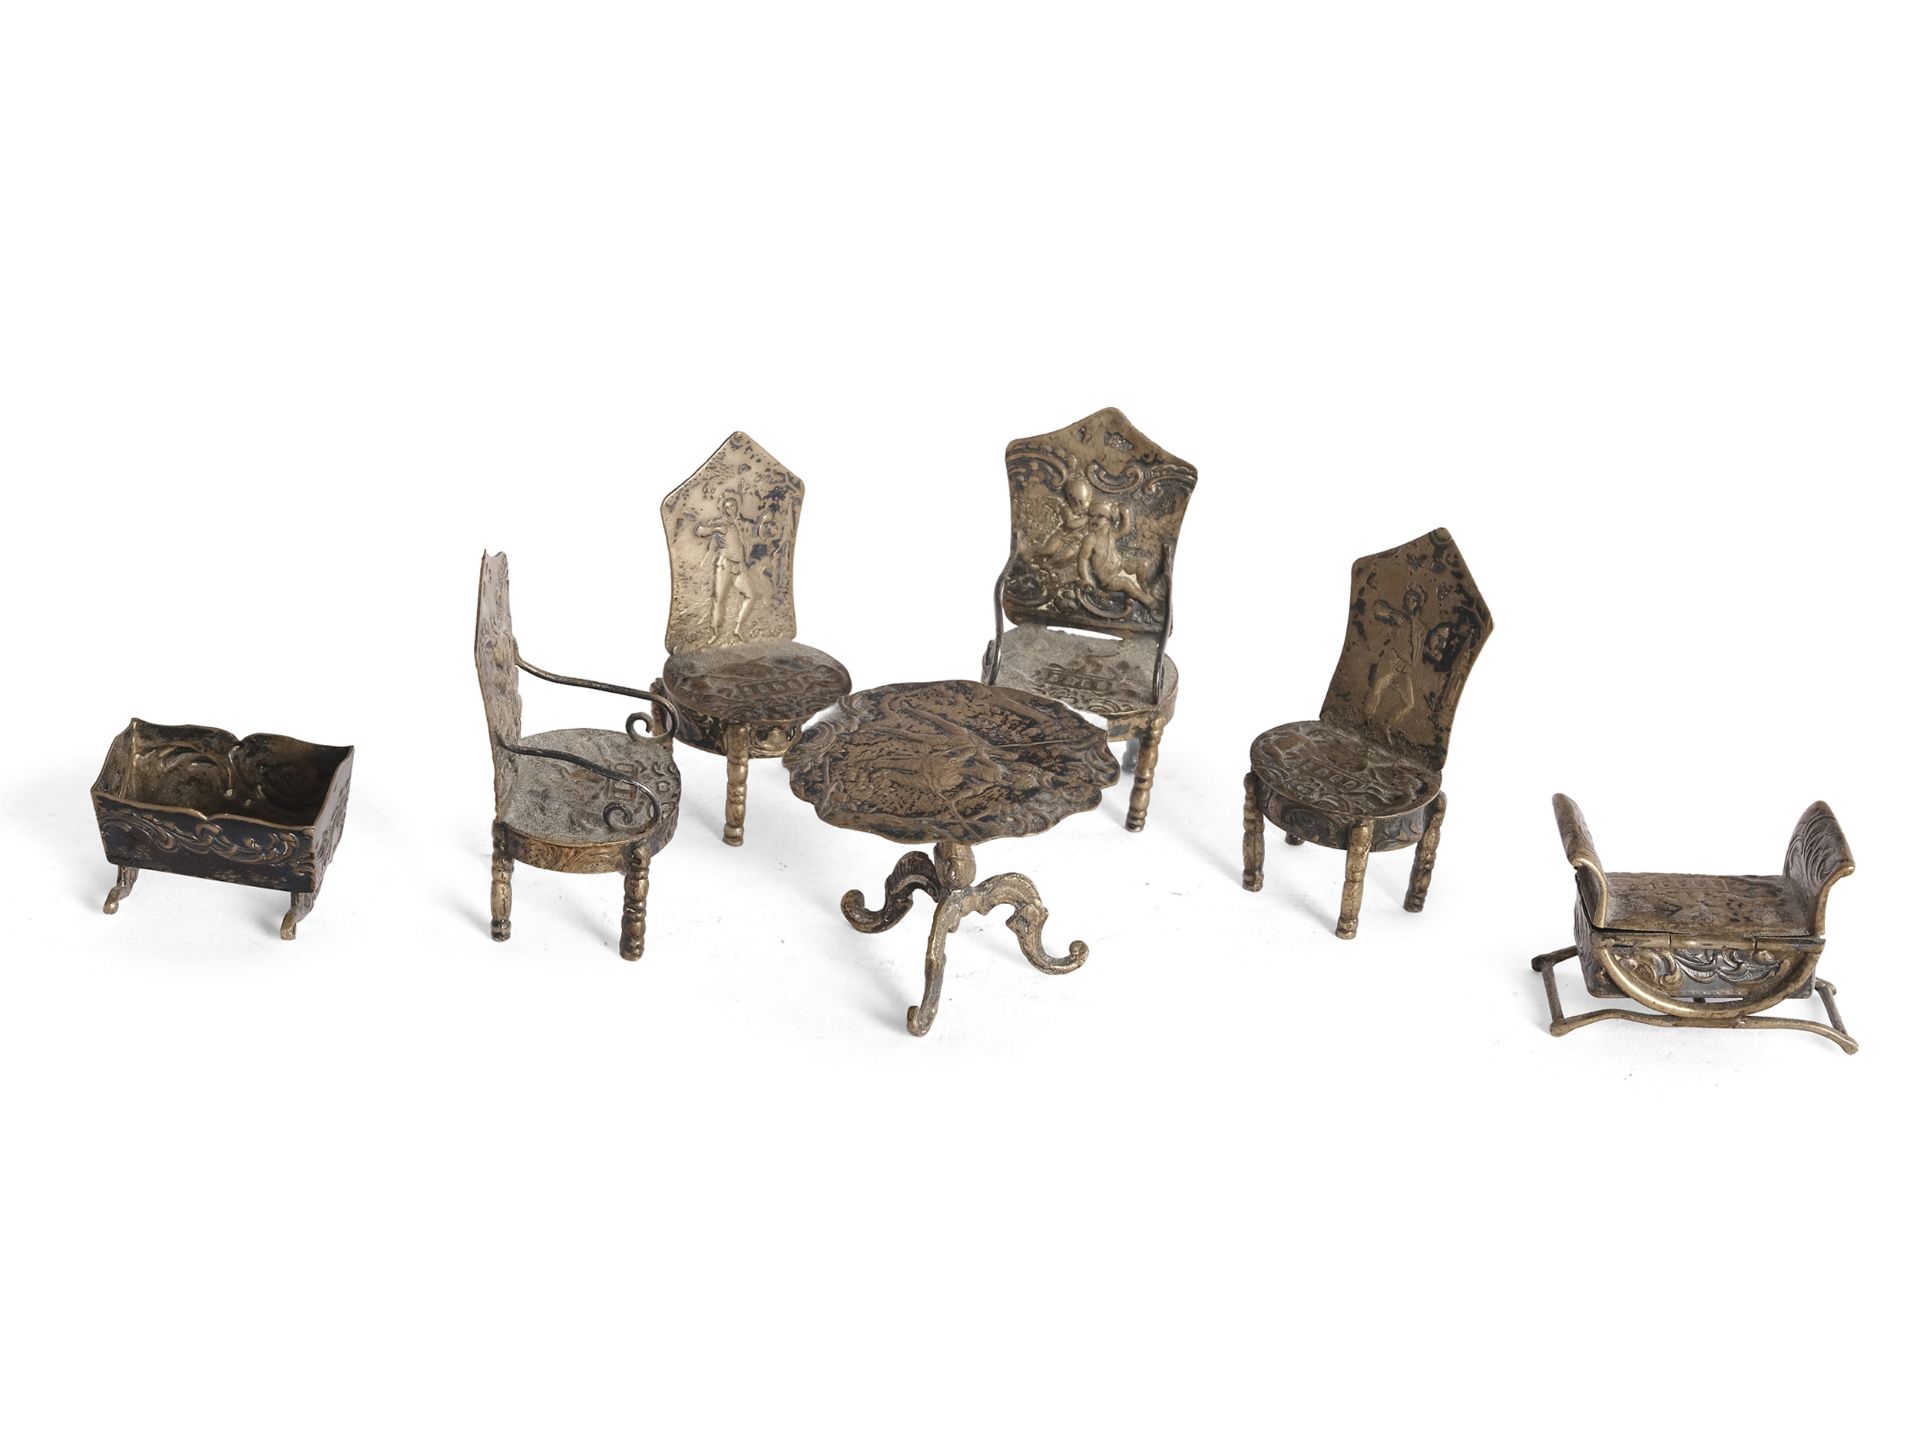 Seating set for doll's house, around 1900/20 - Image 2 of 2